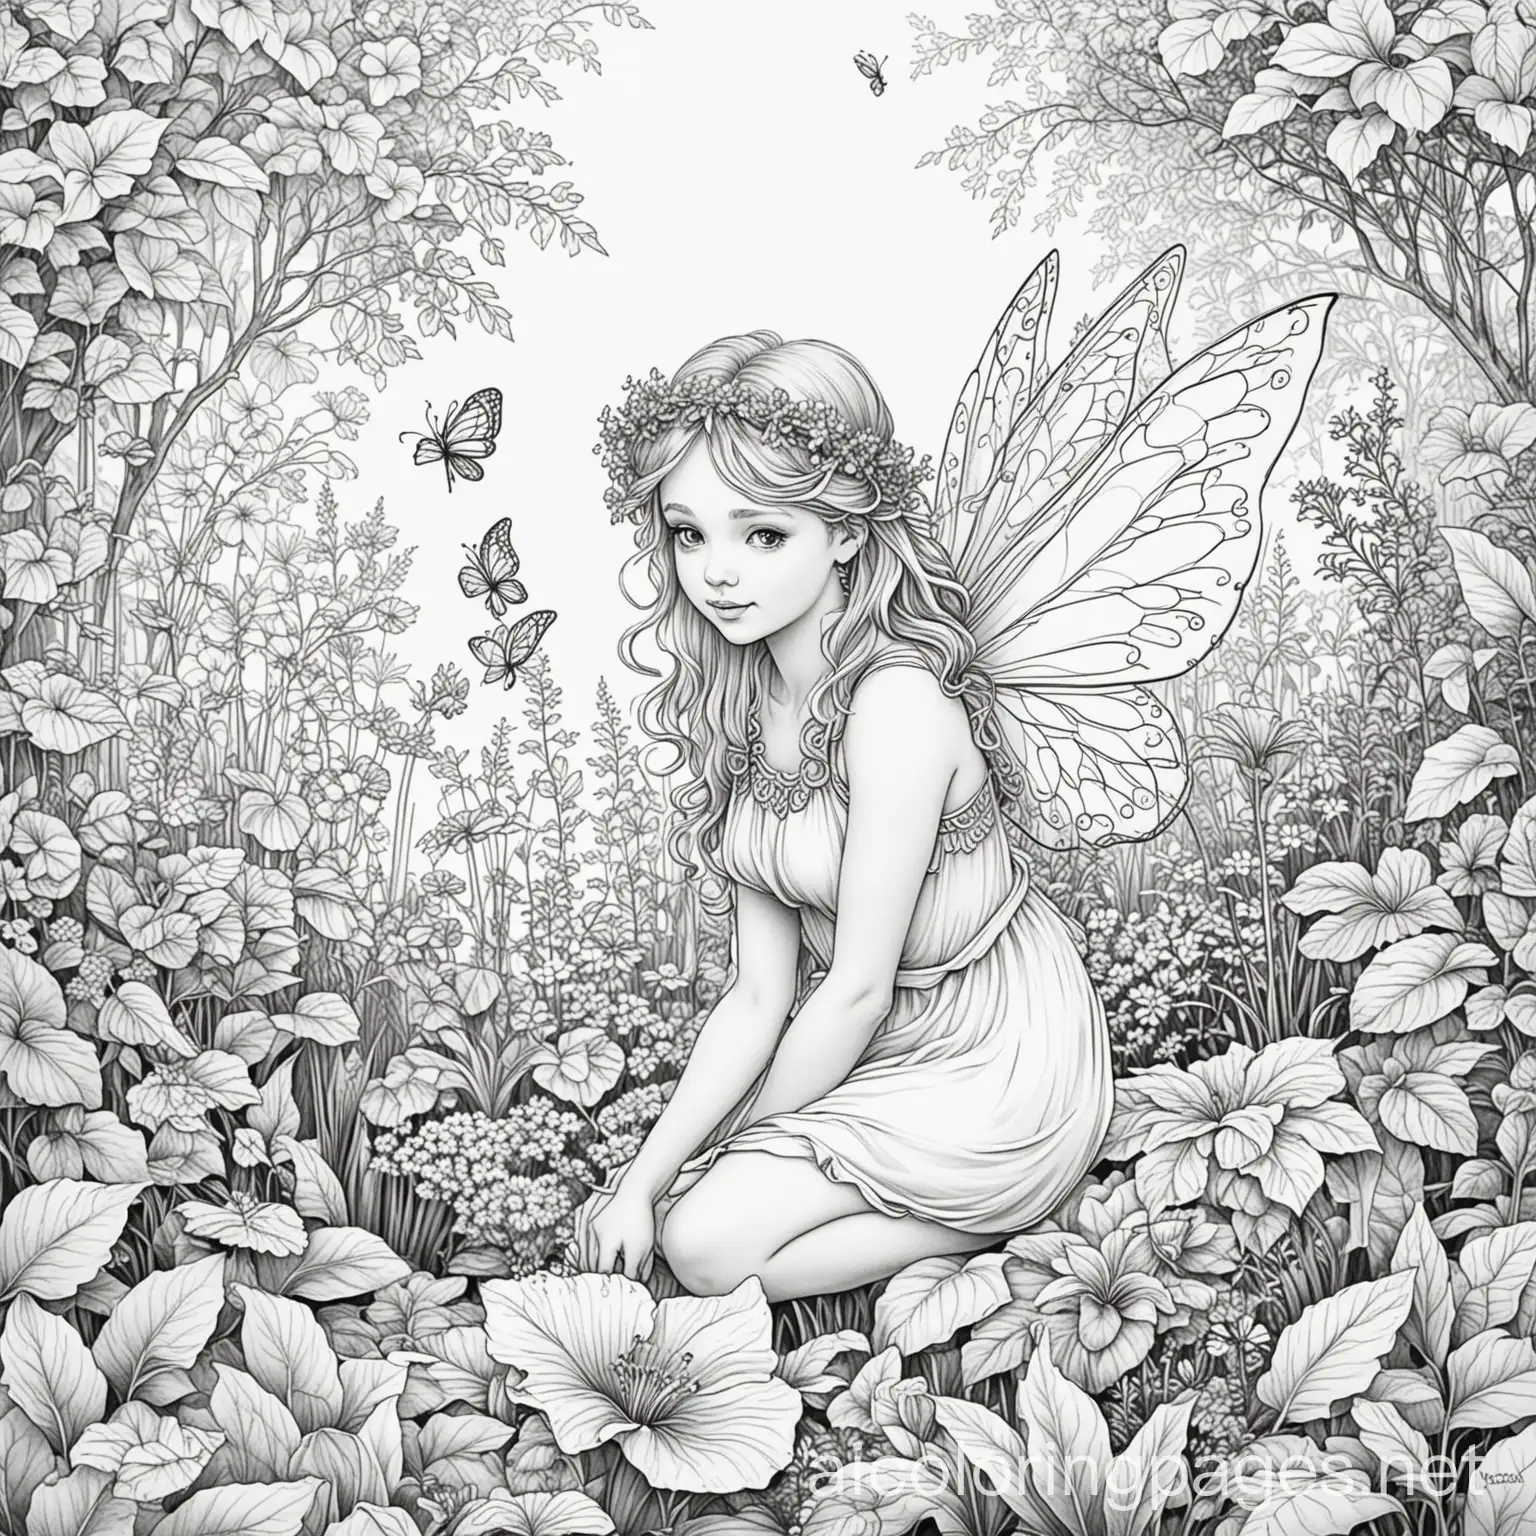 fairy in garden, Coloring Page, black and white, line art, white background, Simplicity, Ample White Space. The background of the coloring page is plain white to make it easy for young children to color within the lines. The outlines of all the subjects are easy to distinguish, making it simple for kids to color without too much difficulty